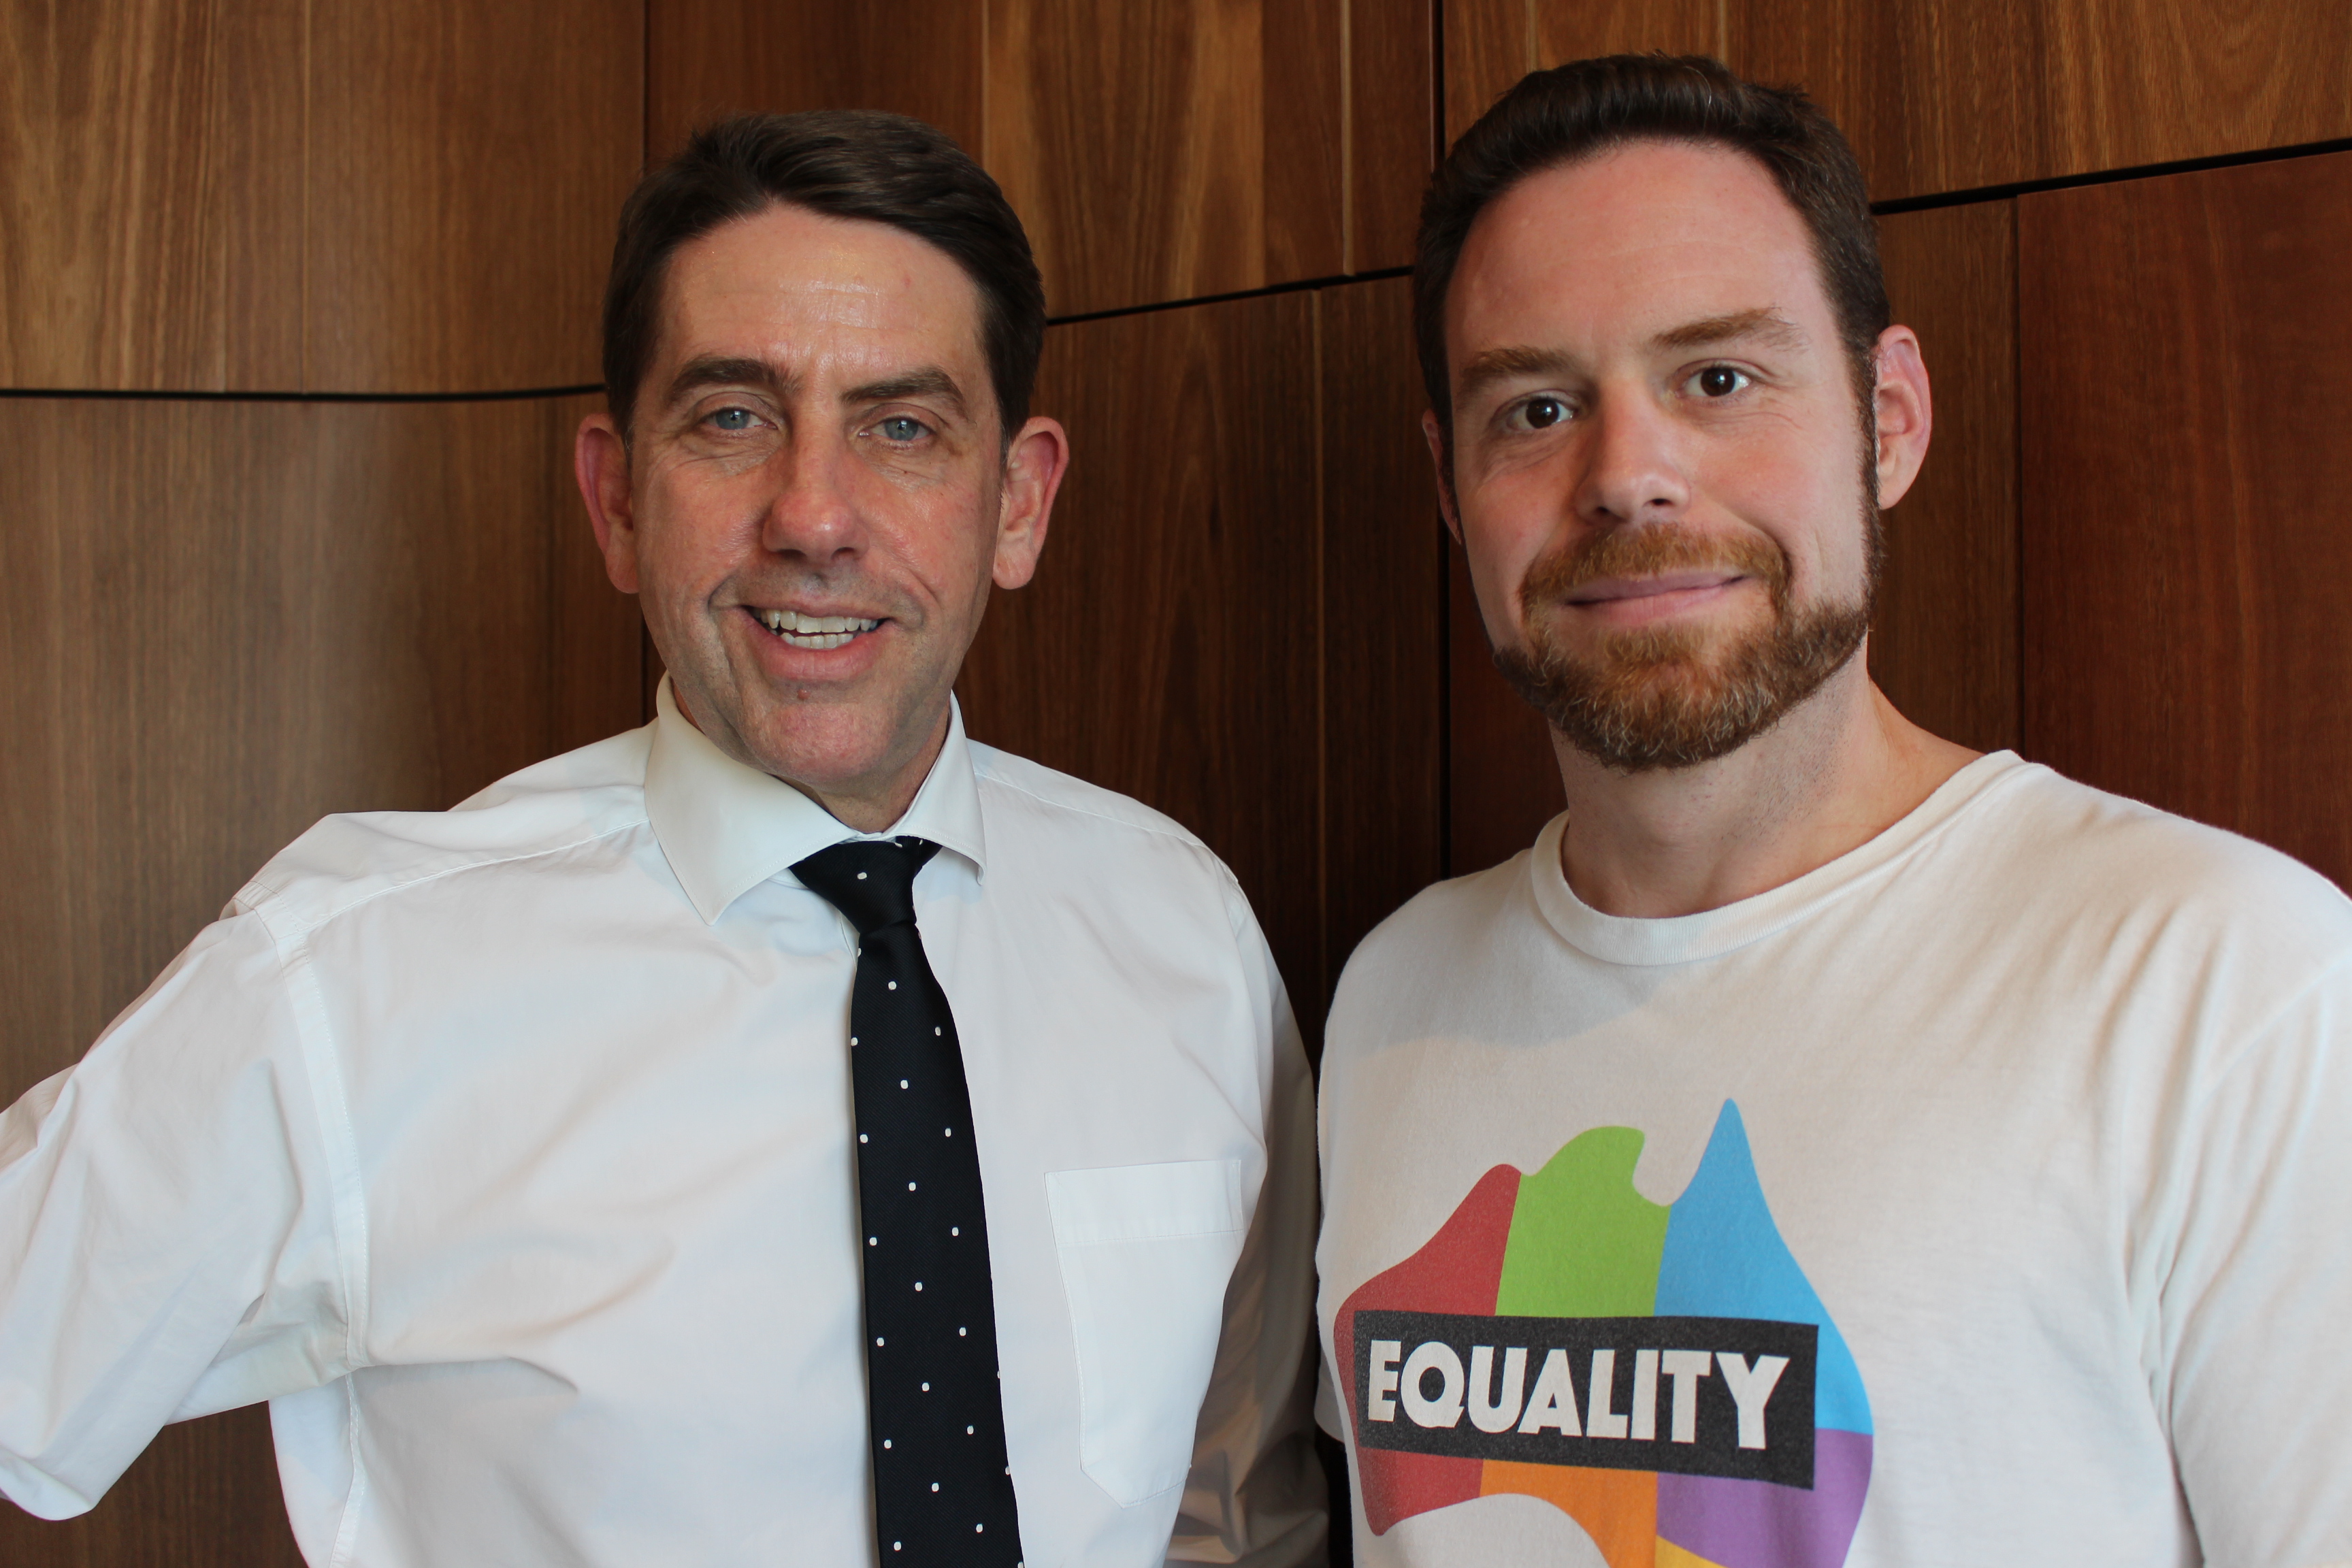 Queensland Health commits funding to support a ‘no harm’ marriage campaign